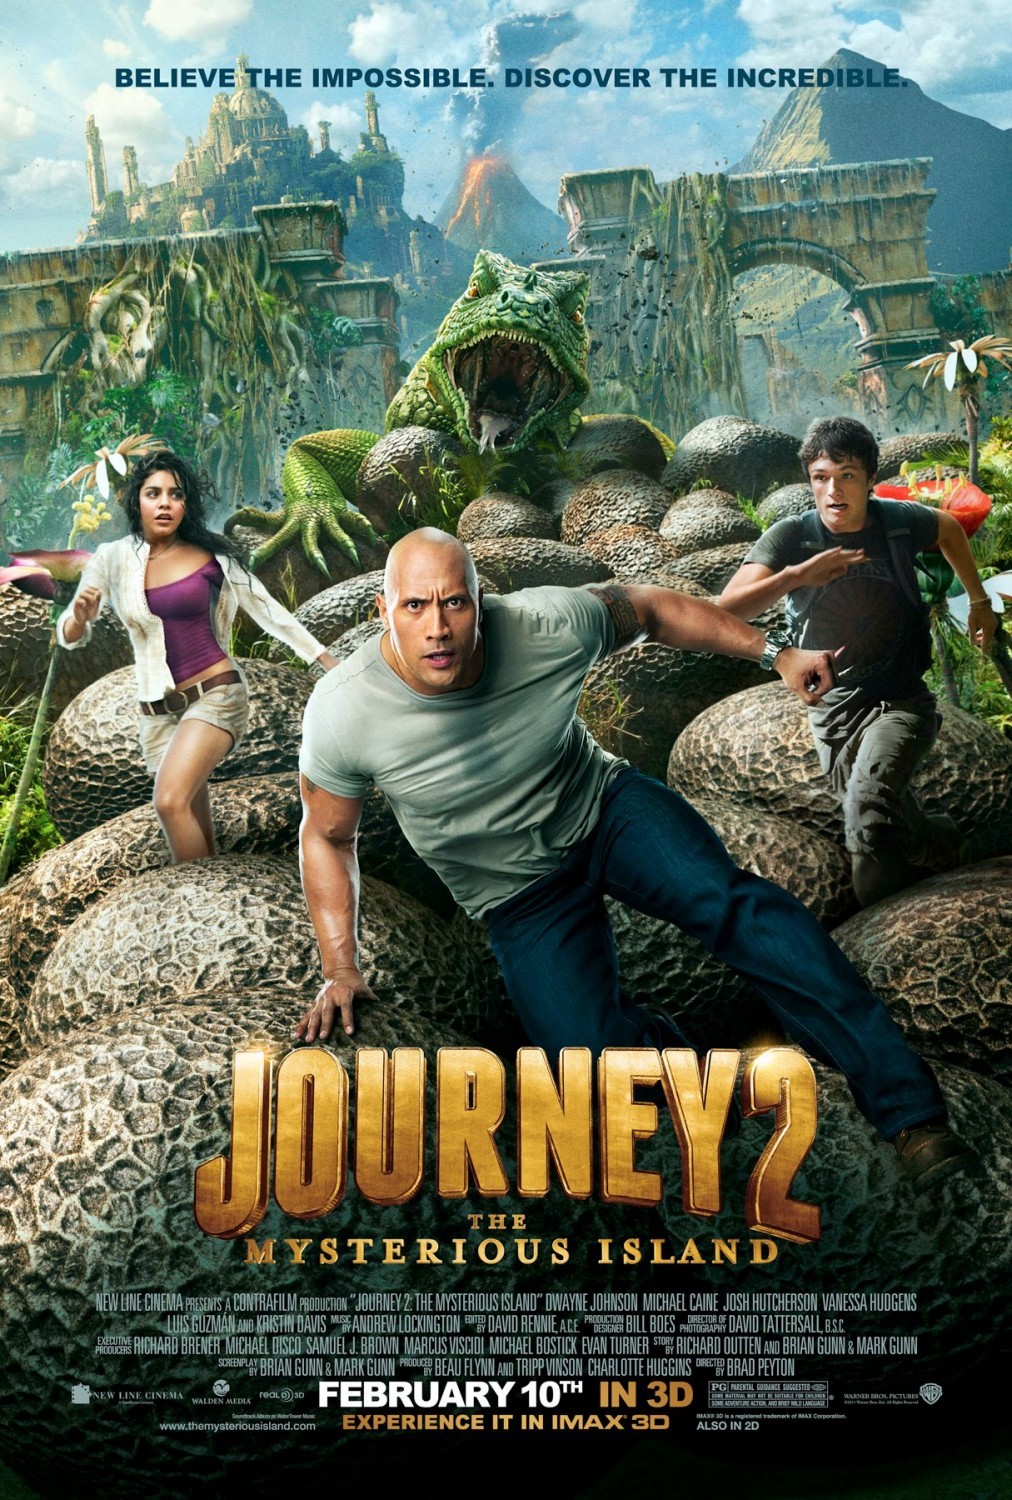 Journey 2 The Mysterious Island (2012) 1080p BluRay Hindi ORG Dual Audio Movie MSubs [2.4GB]